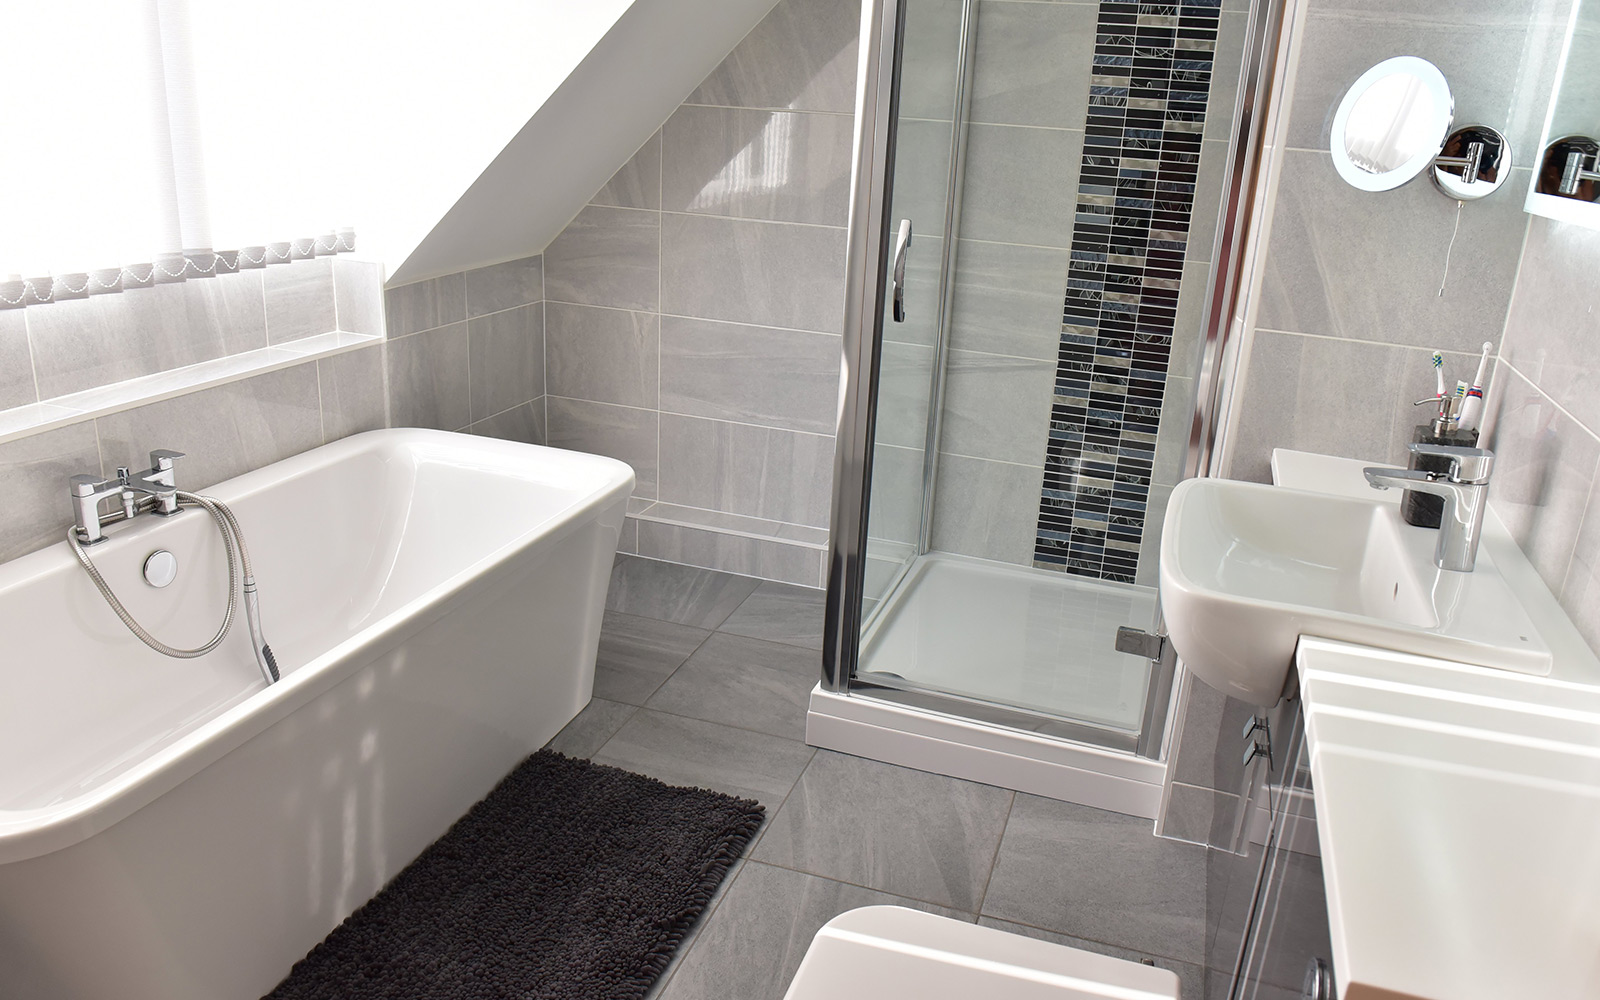 New bathroom installed by the KBB Centre in Ipswich